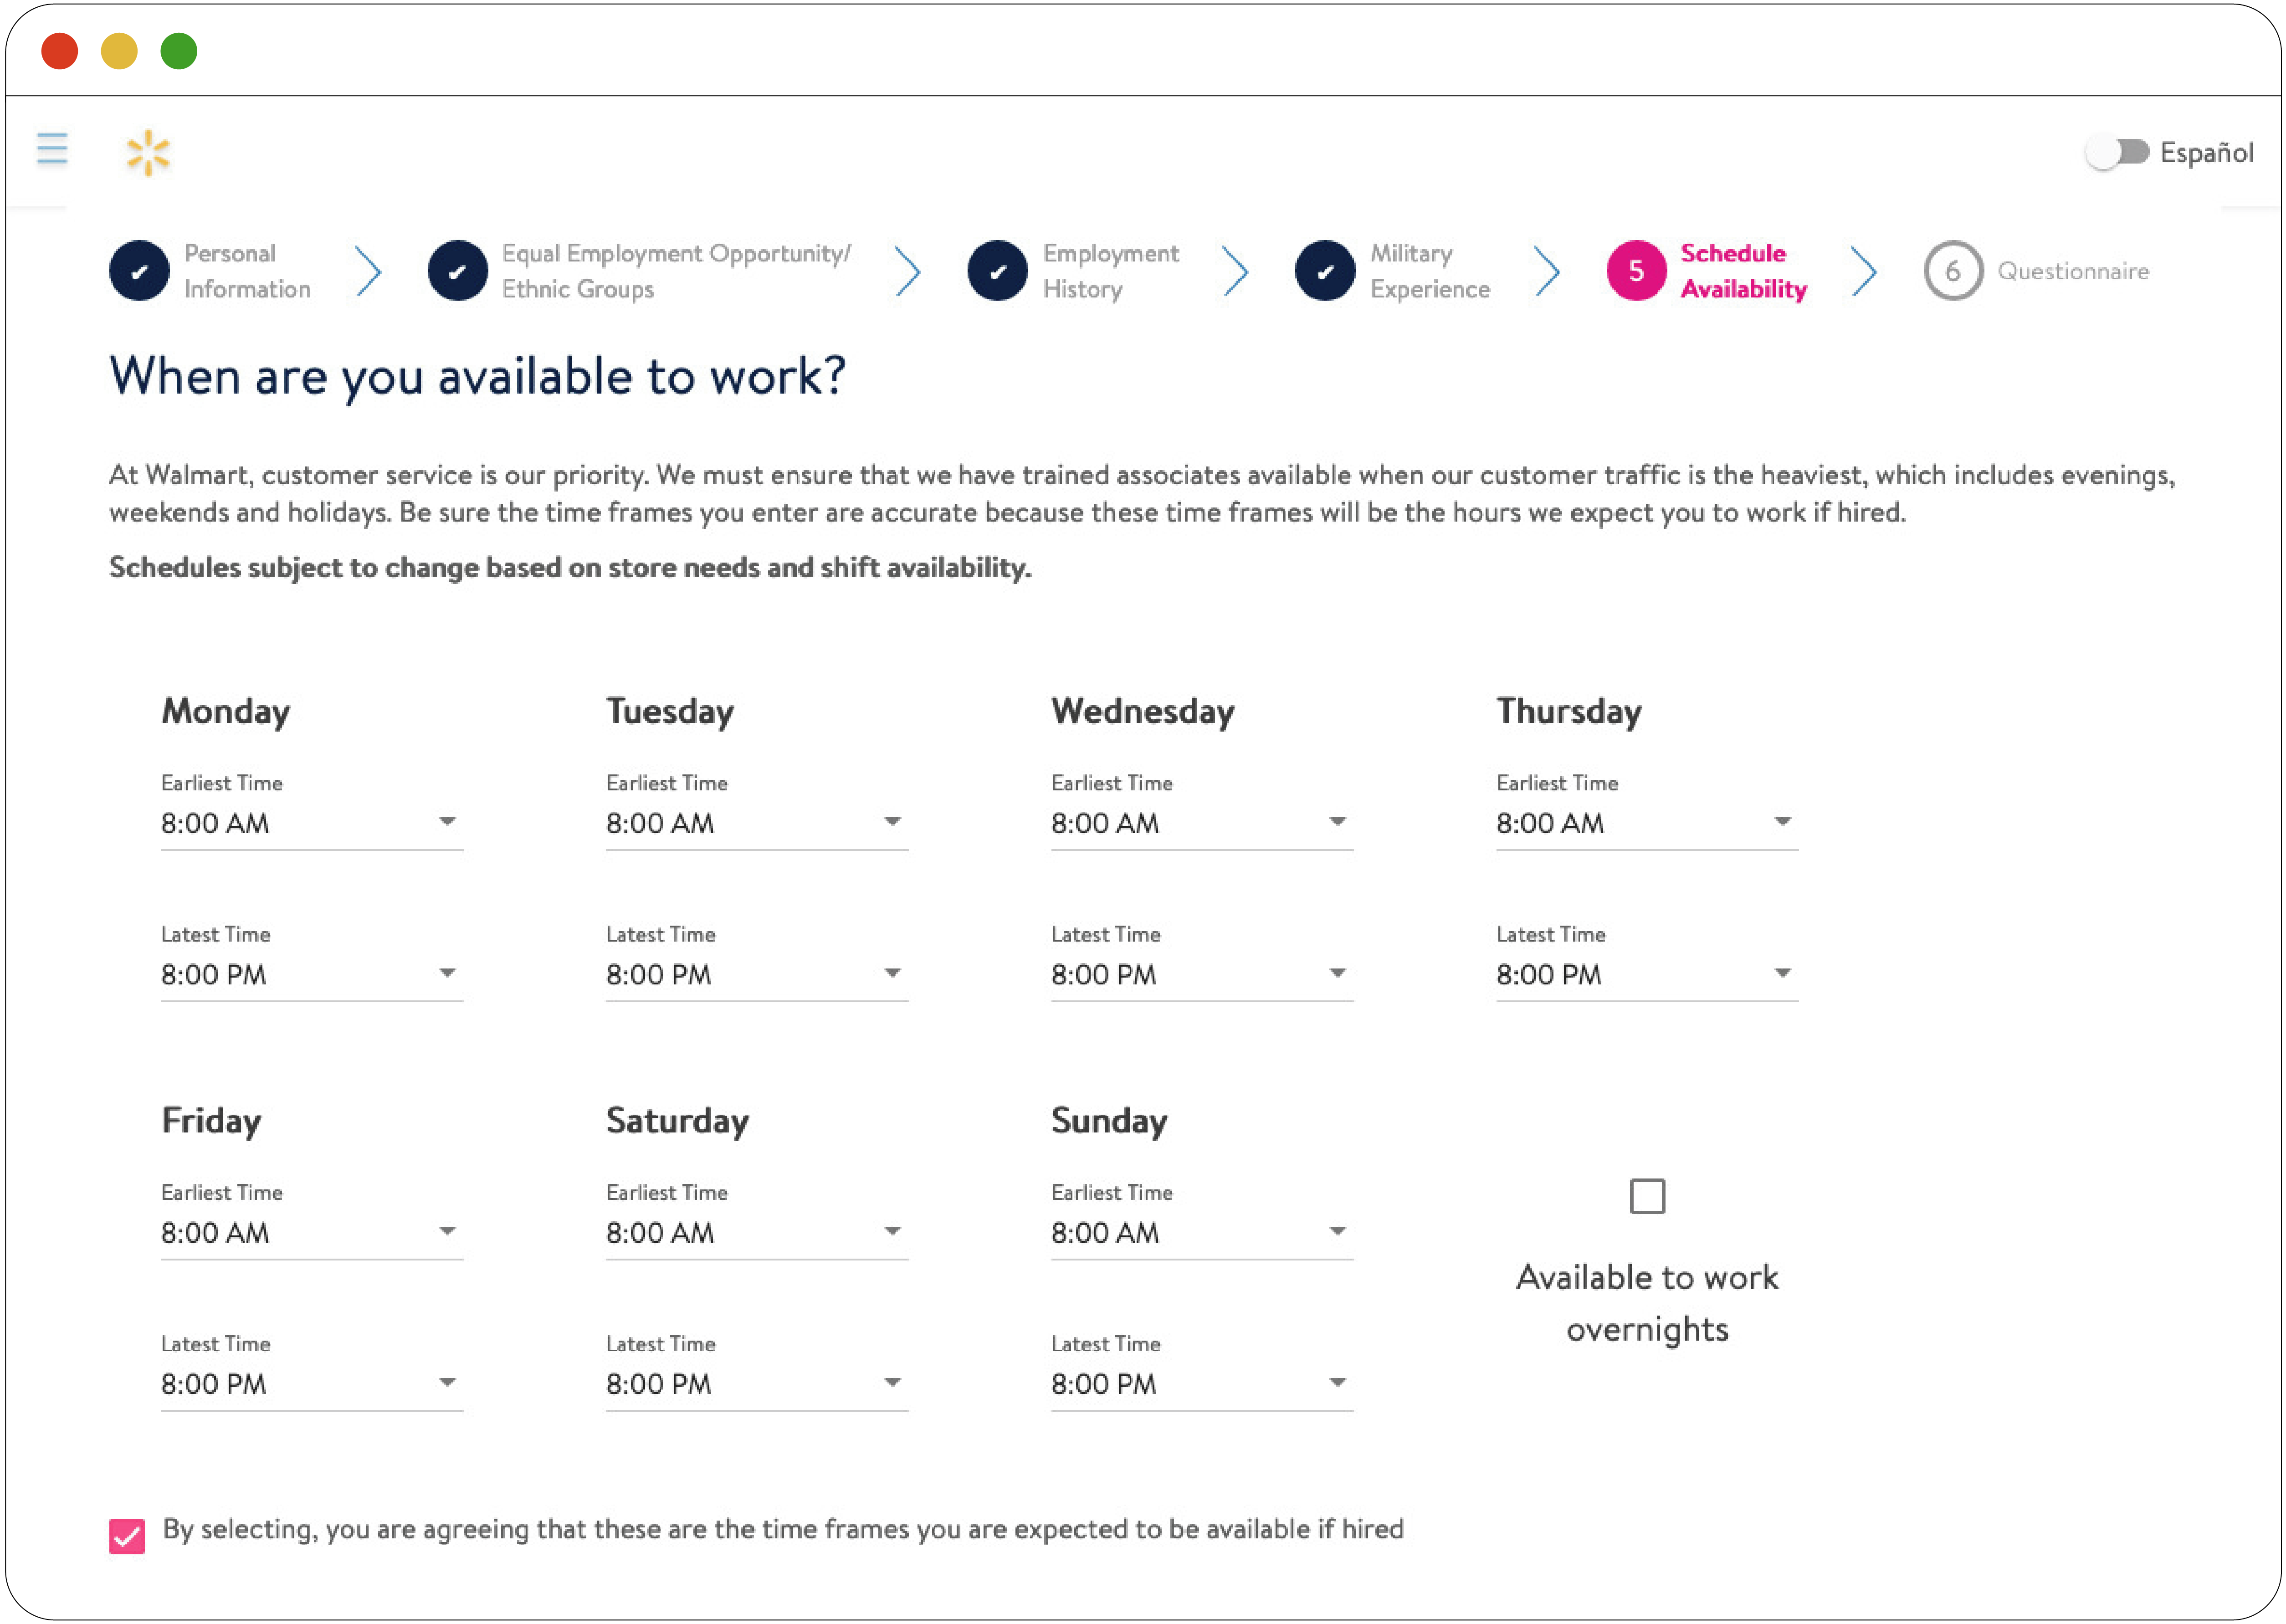 This figure shows a screenshot of Walmart’s scheduling questions for candidates, with options to select the earliest and latest time an applicant is available. There is also a checkbox to indicate availability to work overnight.